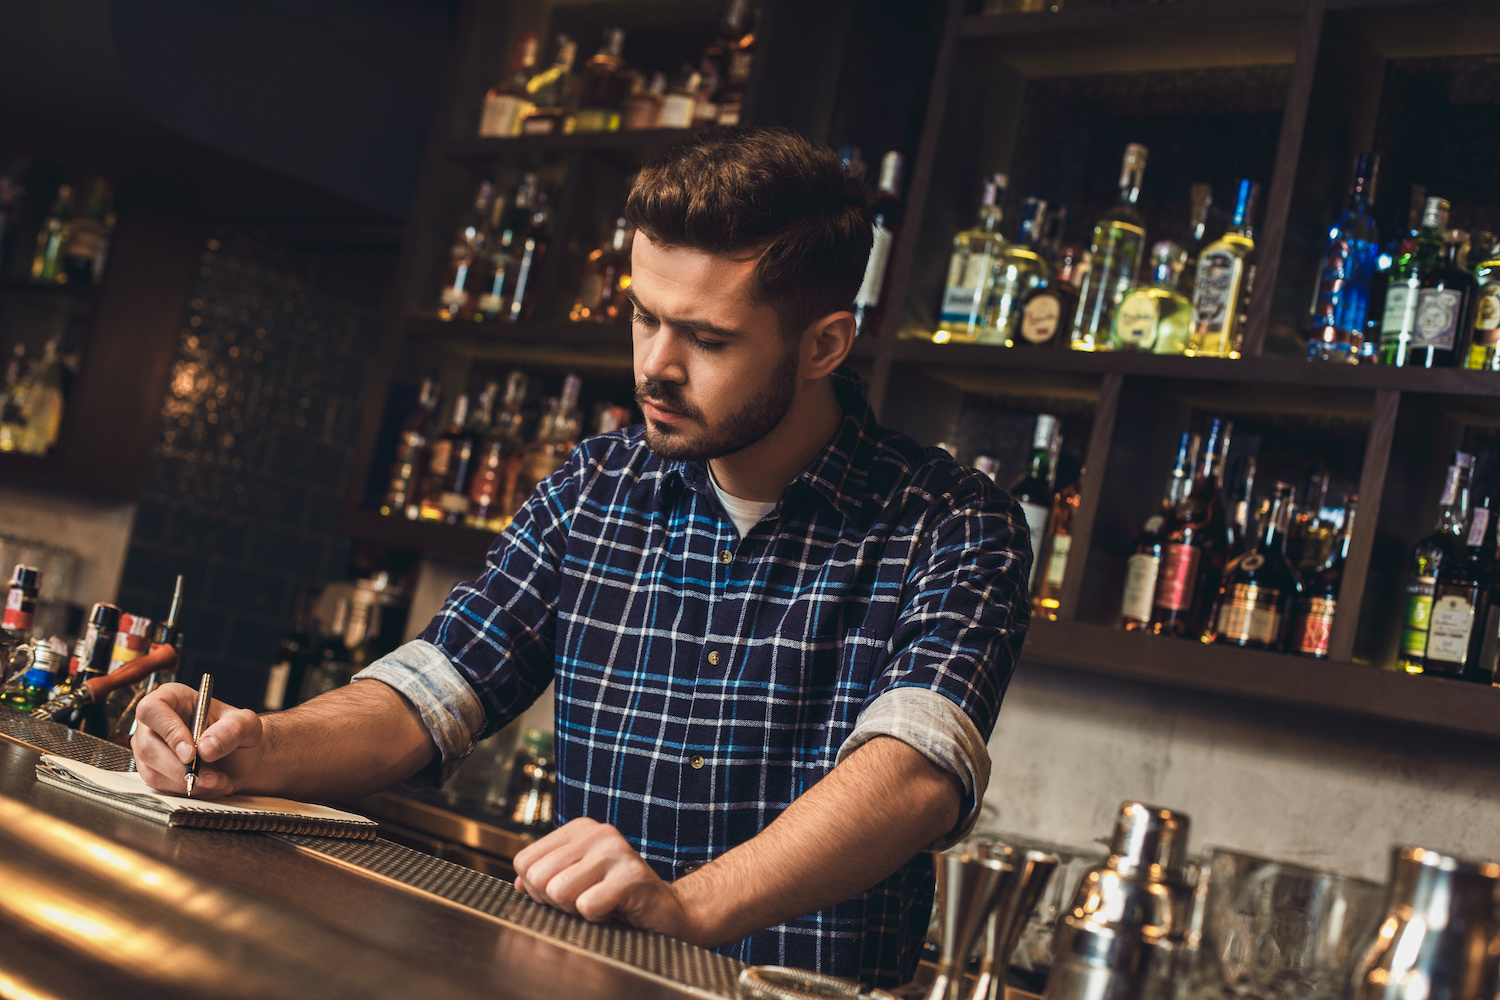 inventory tips for bars and restaurants